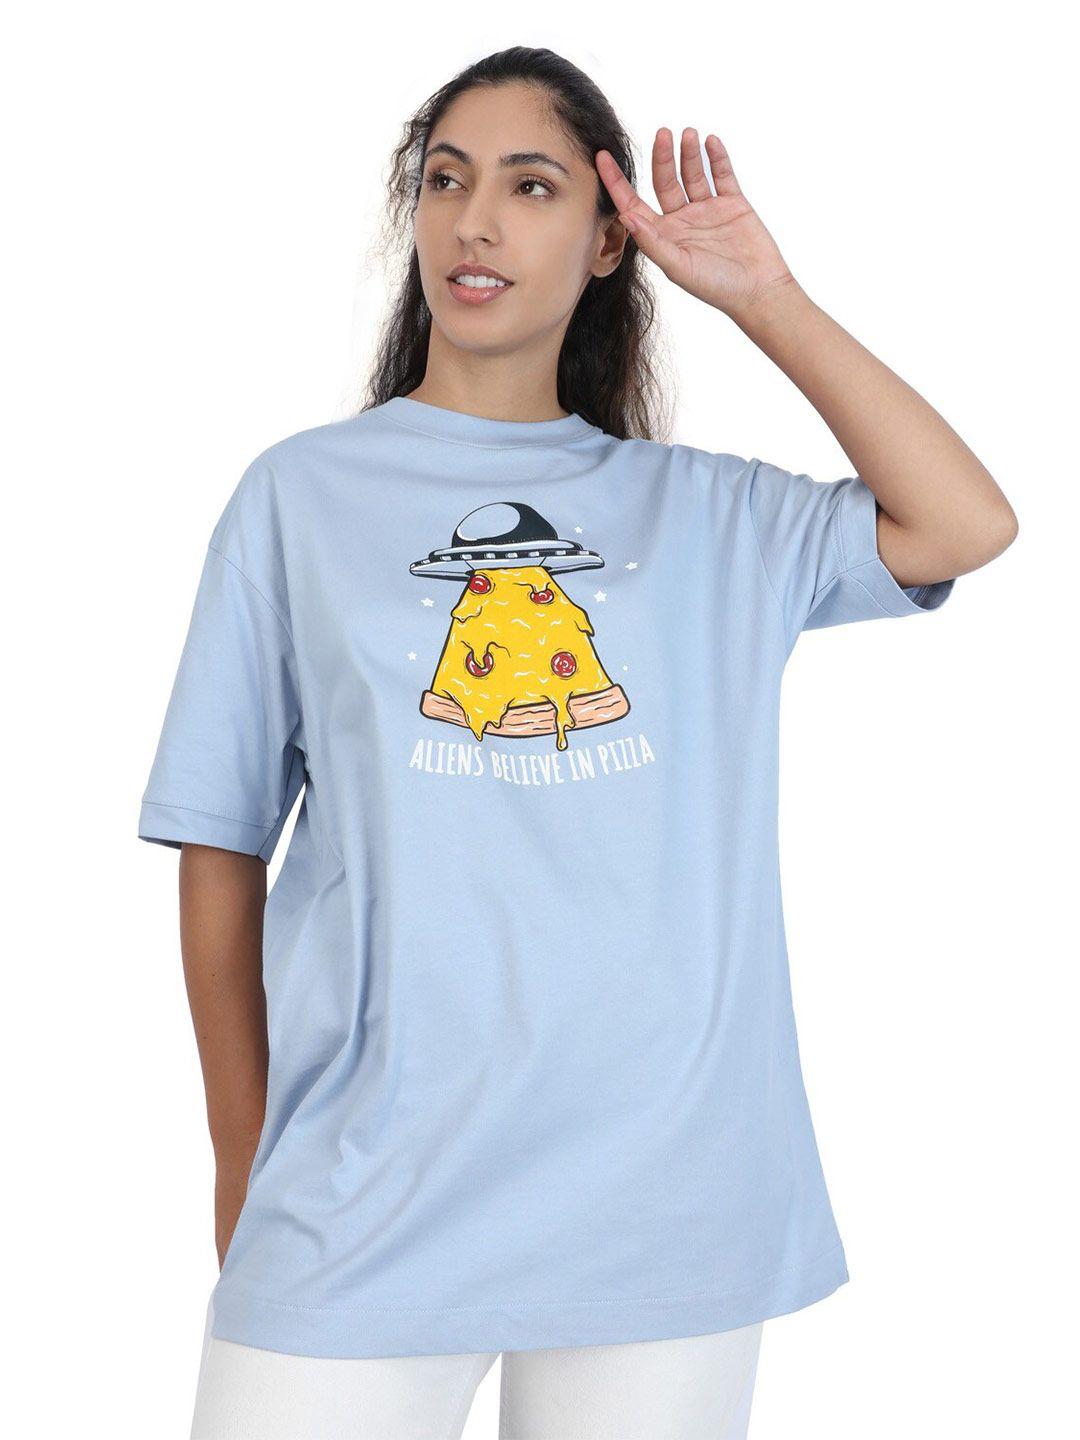 zu-humour-and-comic-printed-cotton-oversized-t-shirt